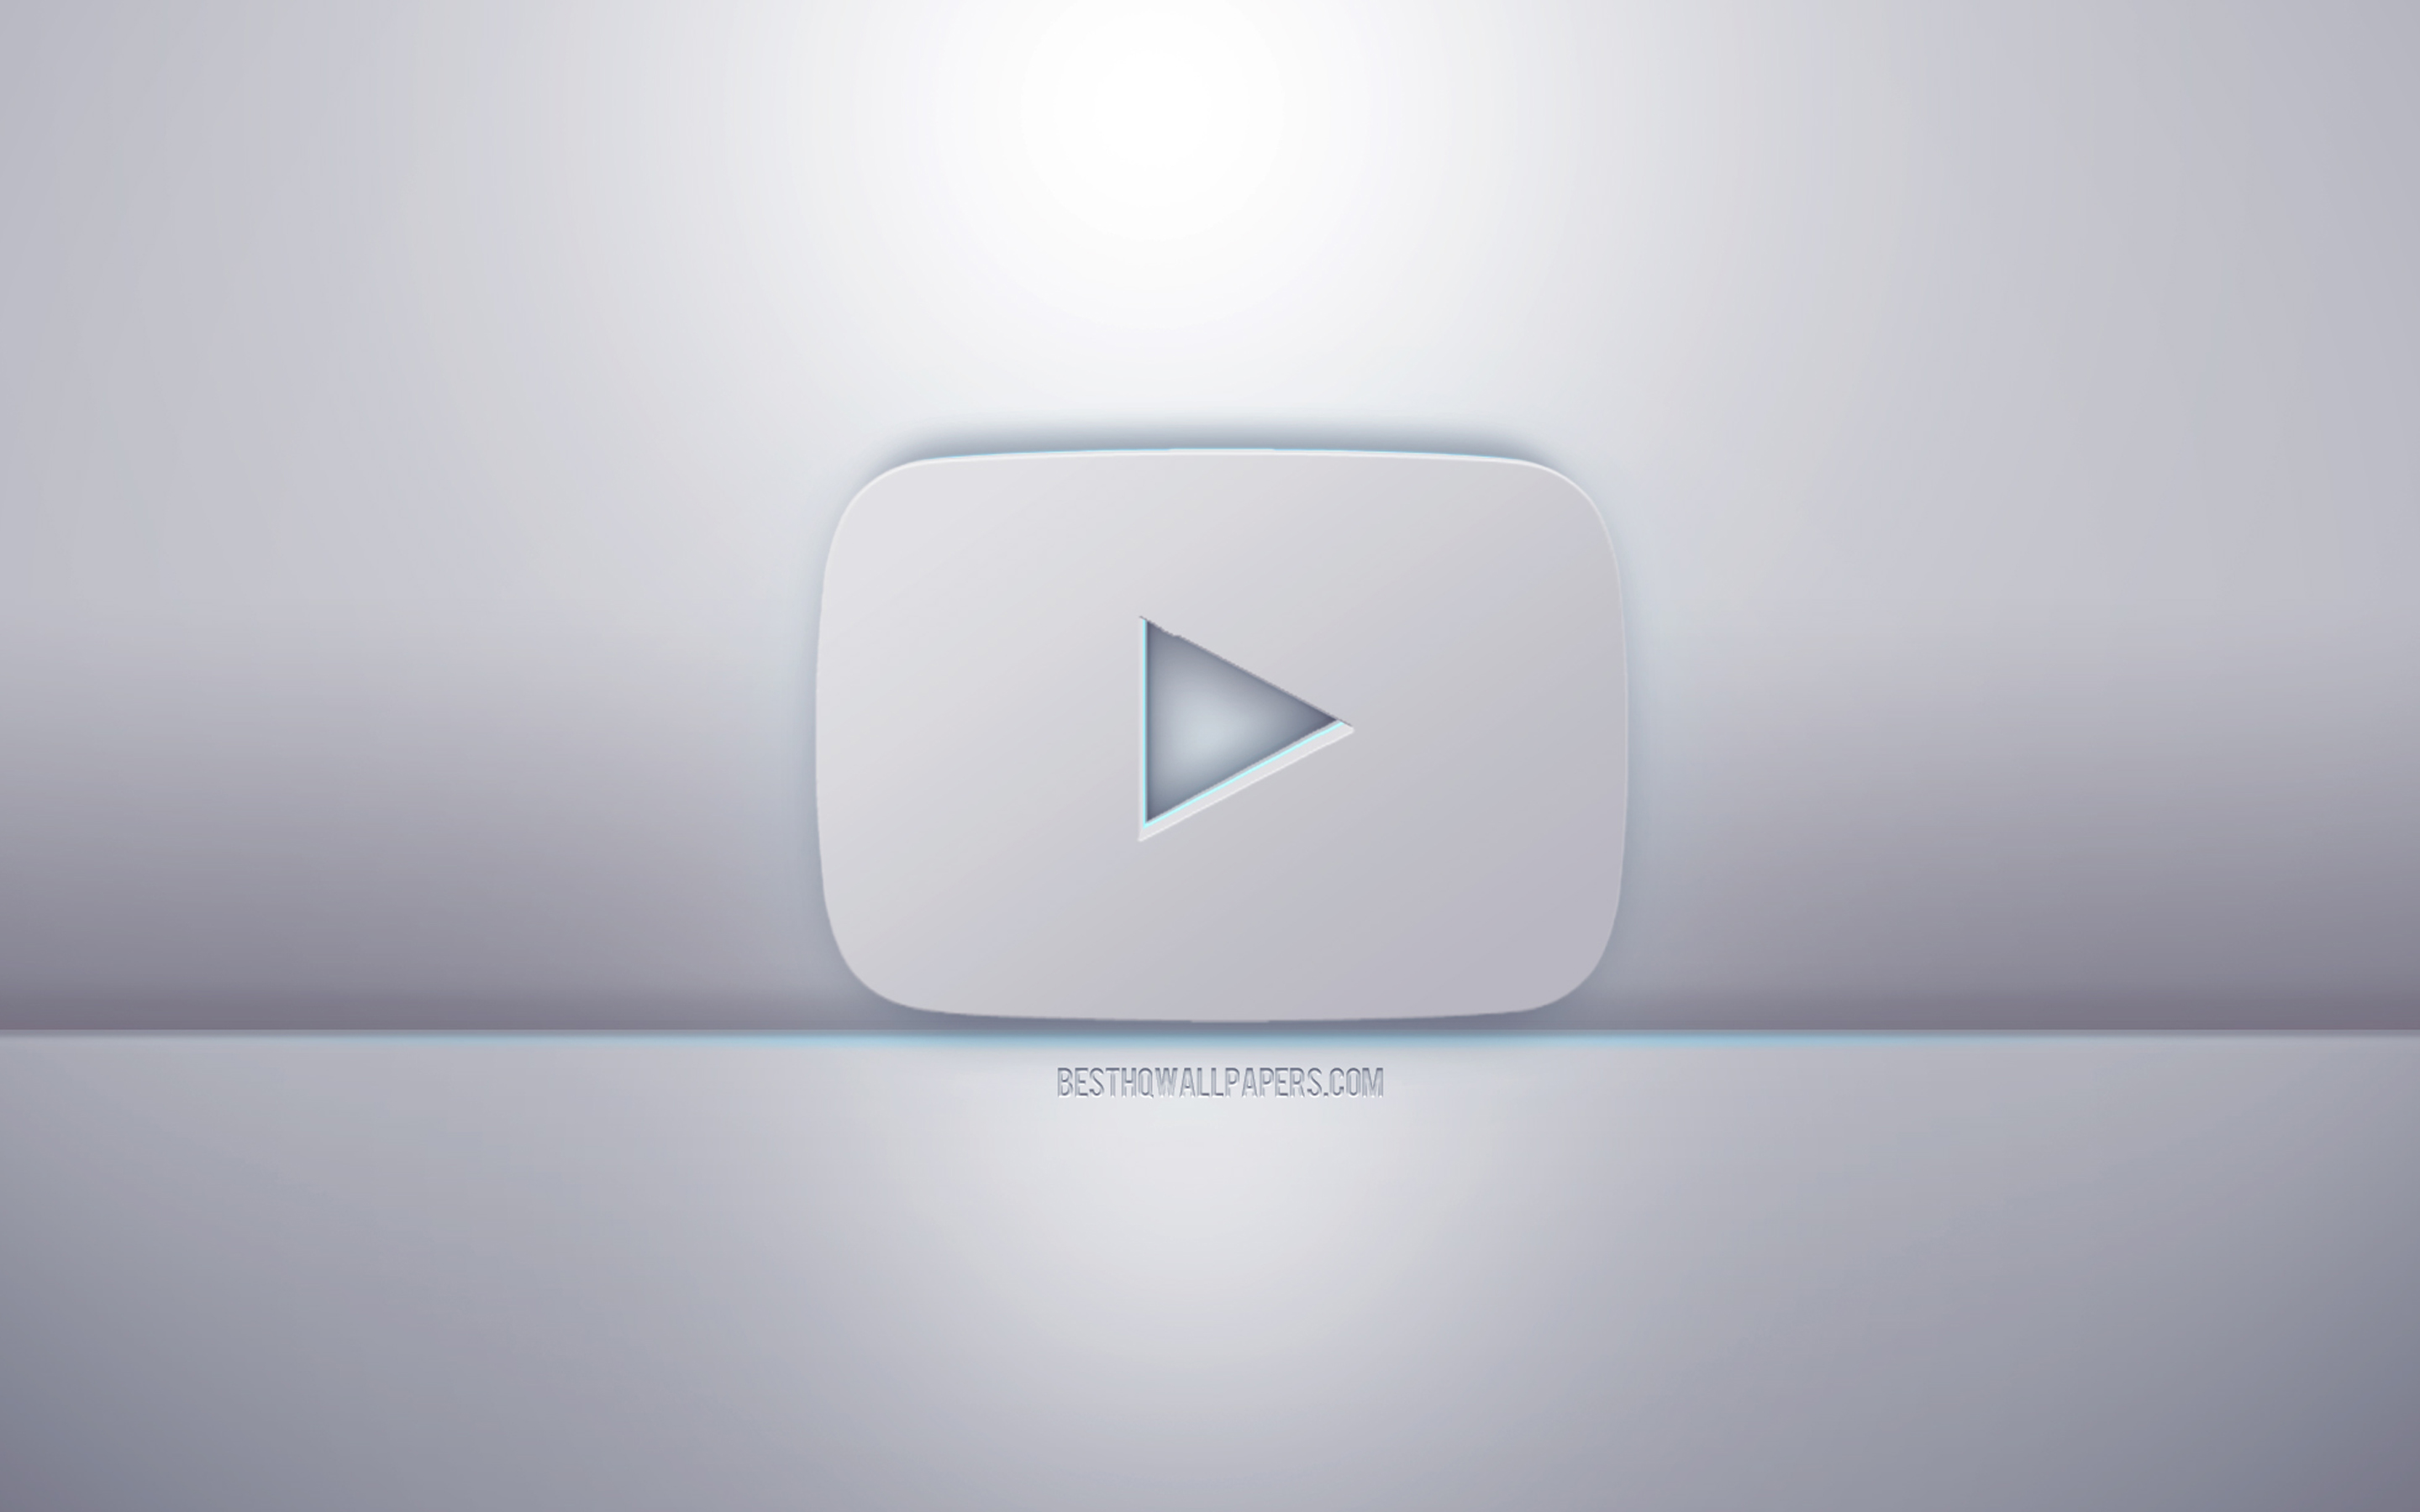 Download wallpapers YouTube 3d white logo, gray background, YouTube logo,  creative 3d art, YouTube, 3d emblem for desktop with resolution 2880x1800.  High Quality HD pictures wallpapers